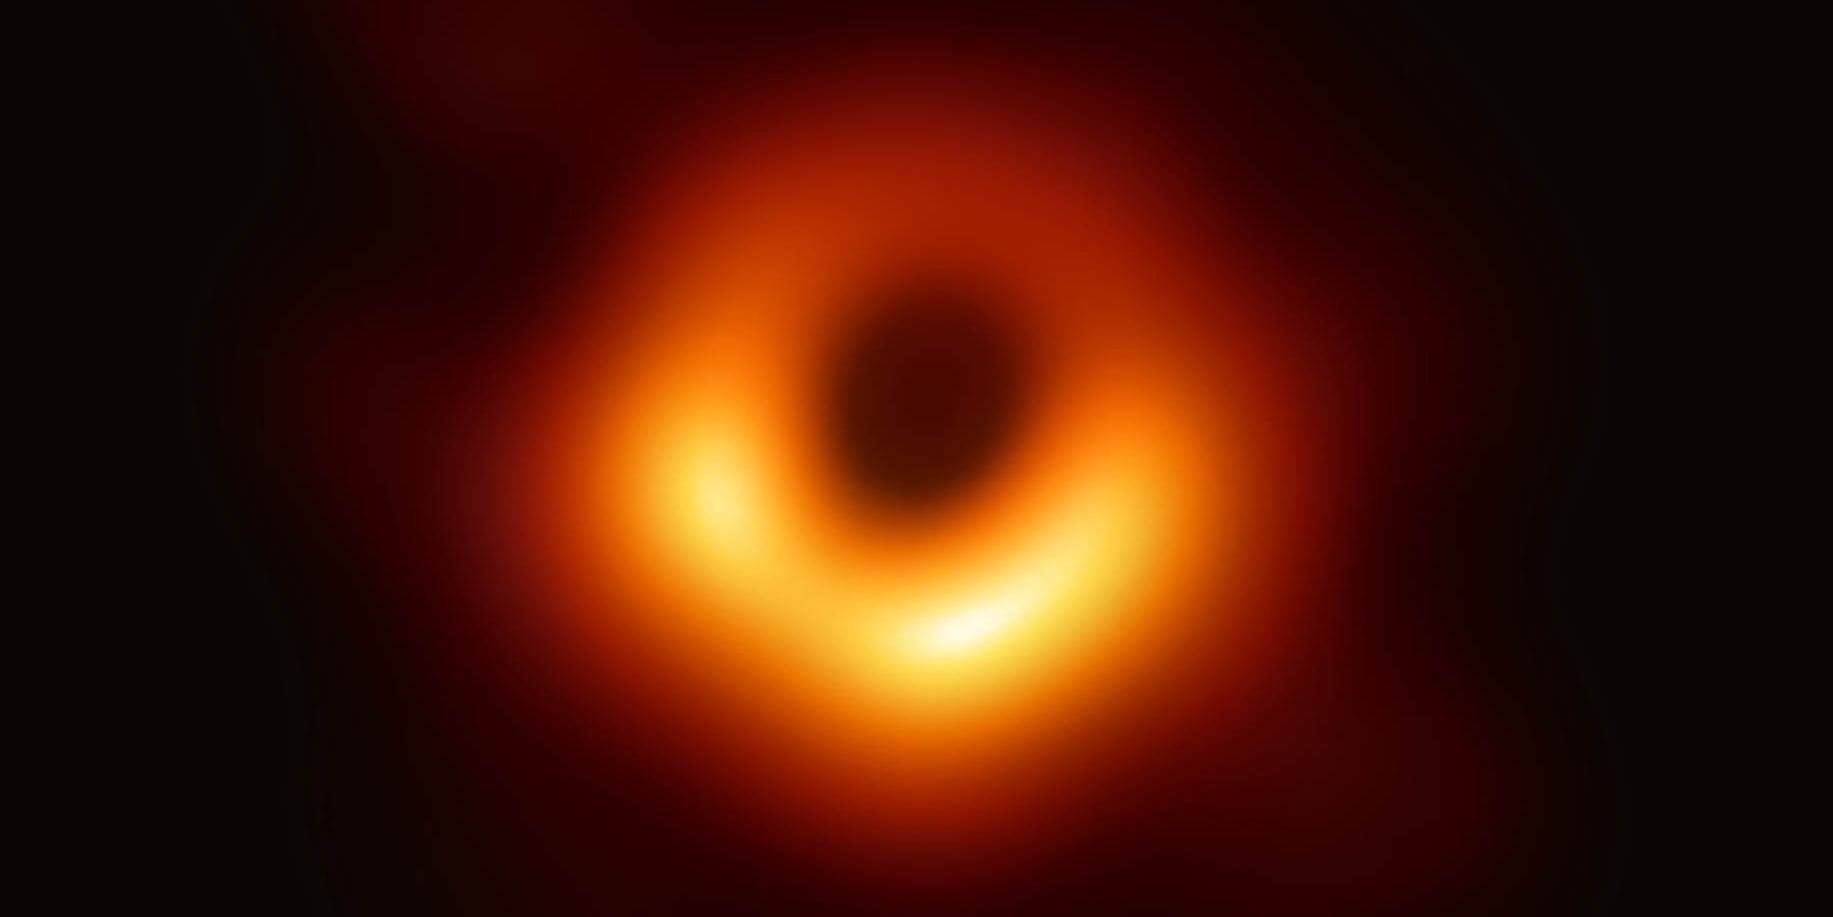 Cover image of Astronomers reveal first-ever image of a black hole